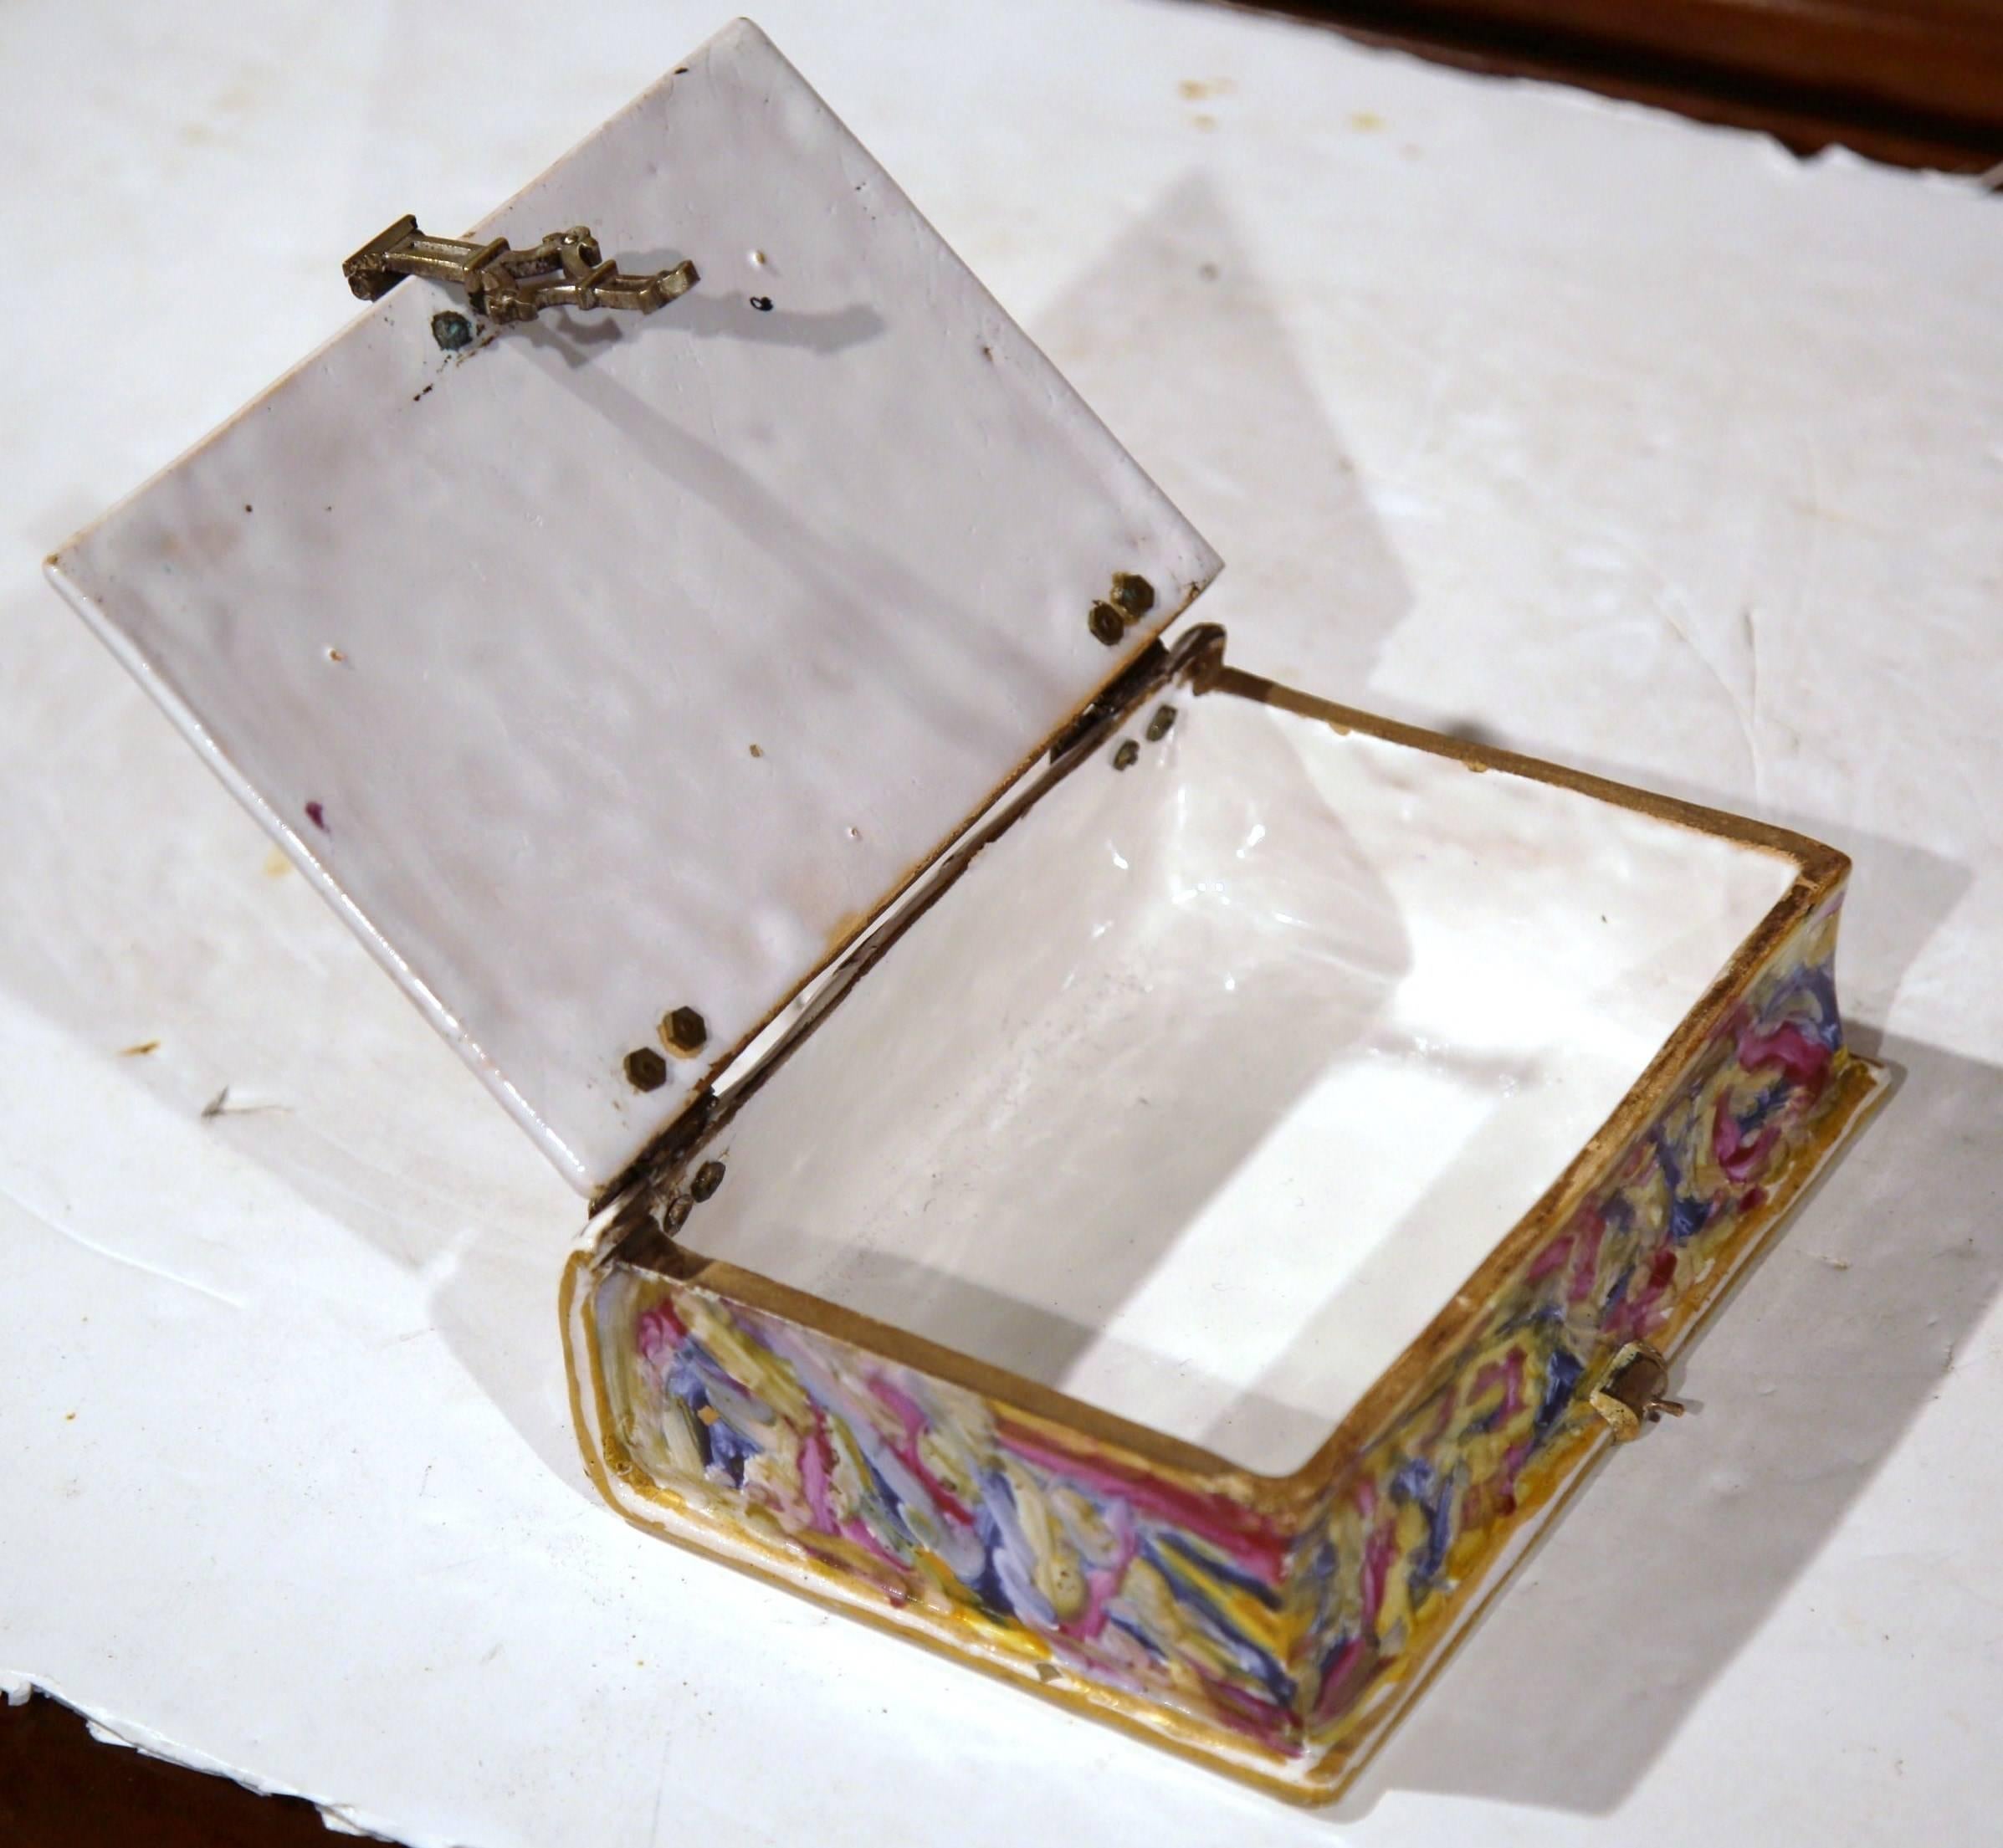 Hand-Crafted Early 19th Century French Hand-Painted Porcelain Jewelry Box Shaped as a Book